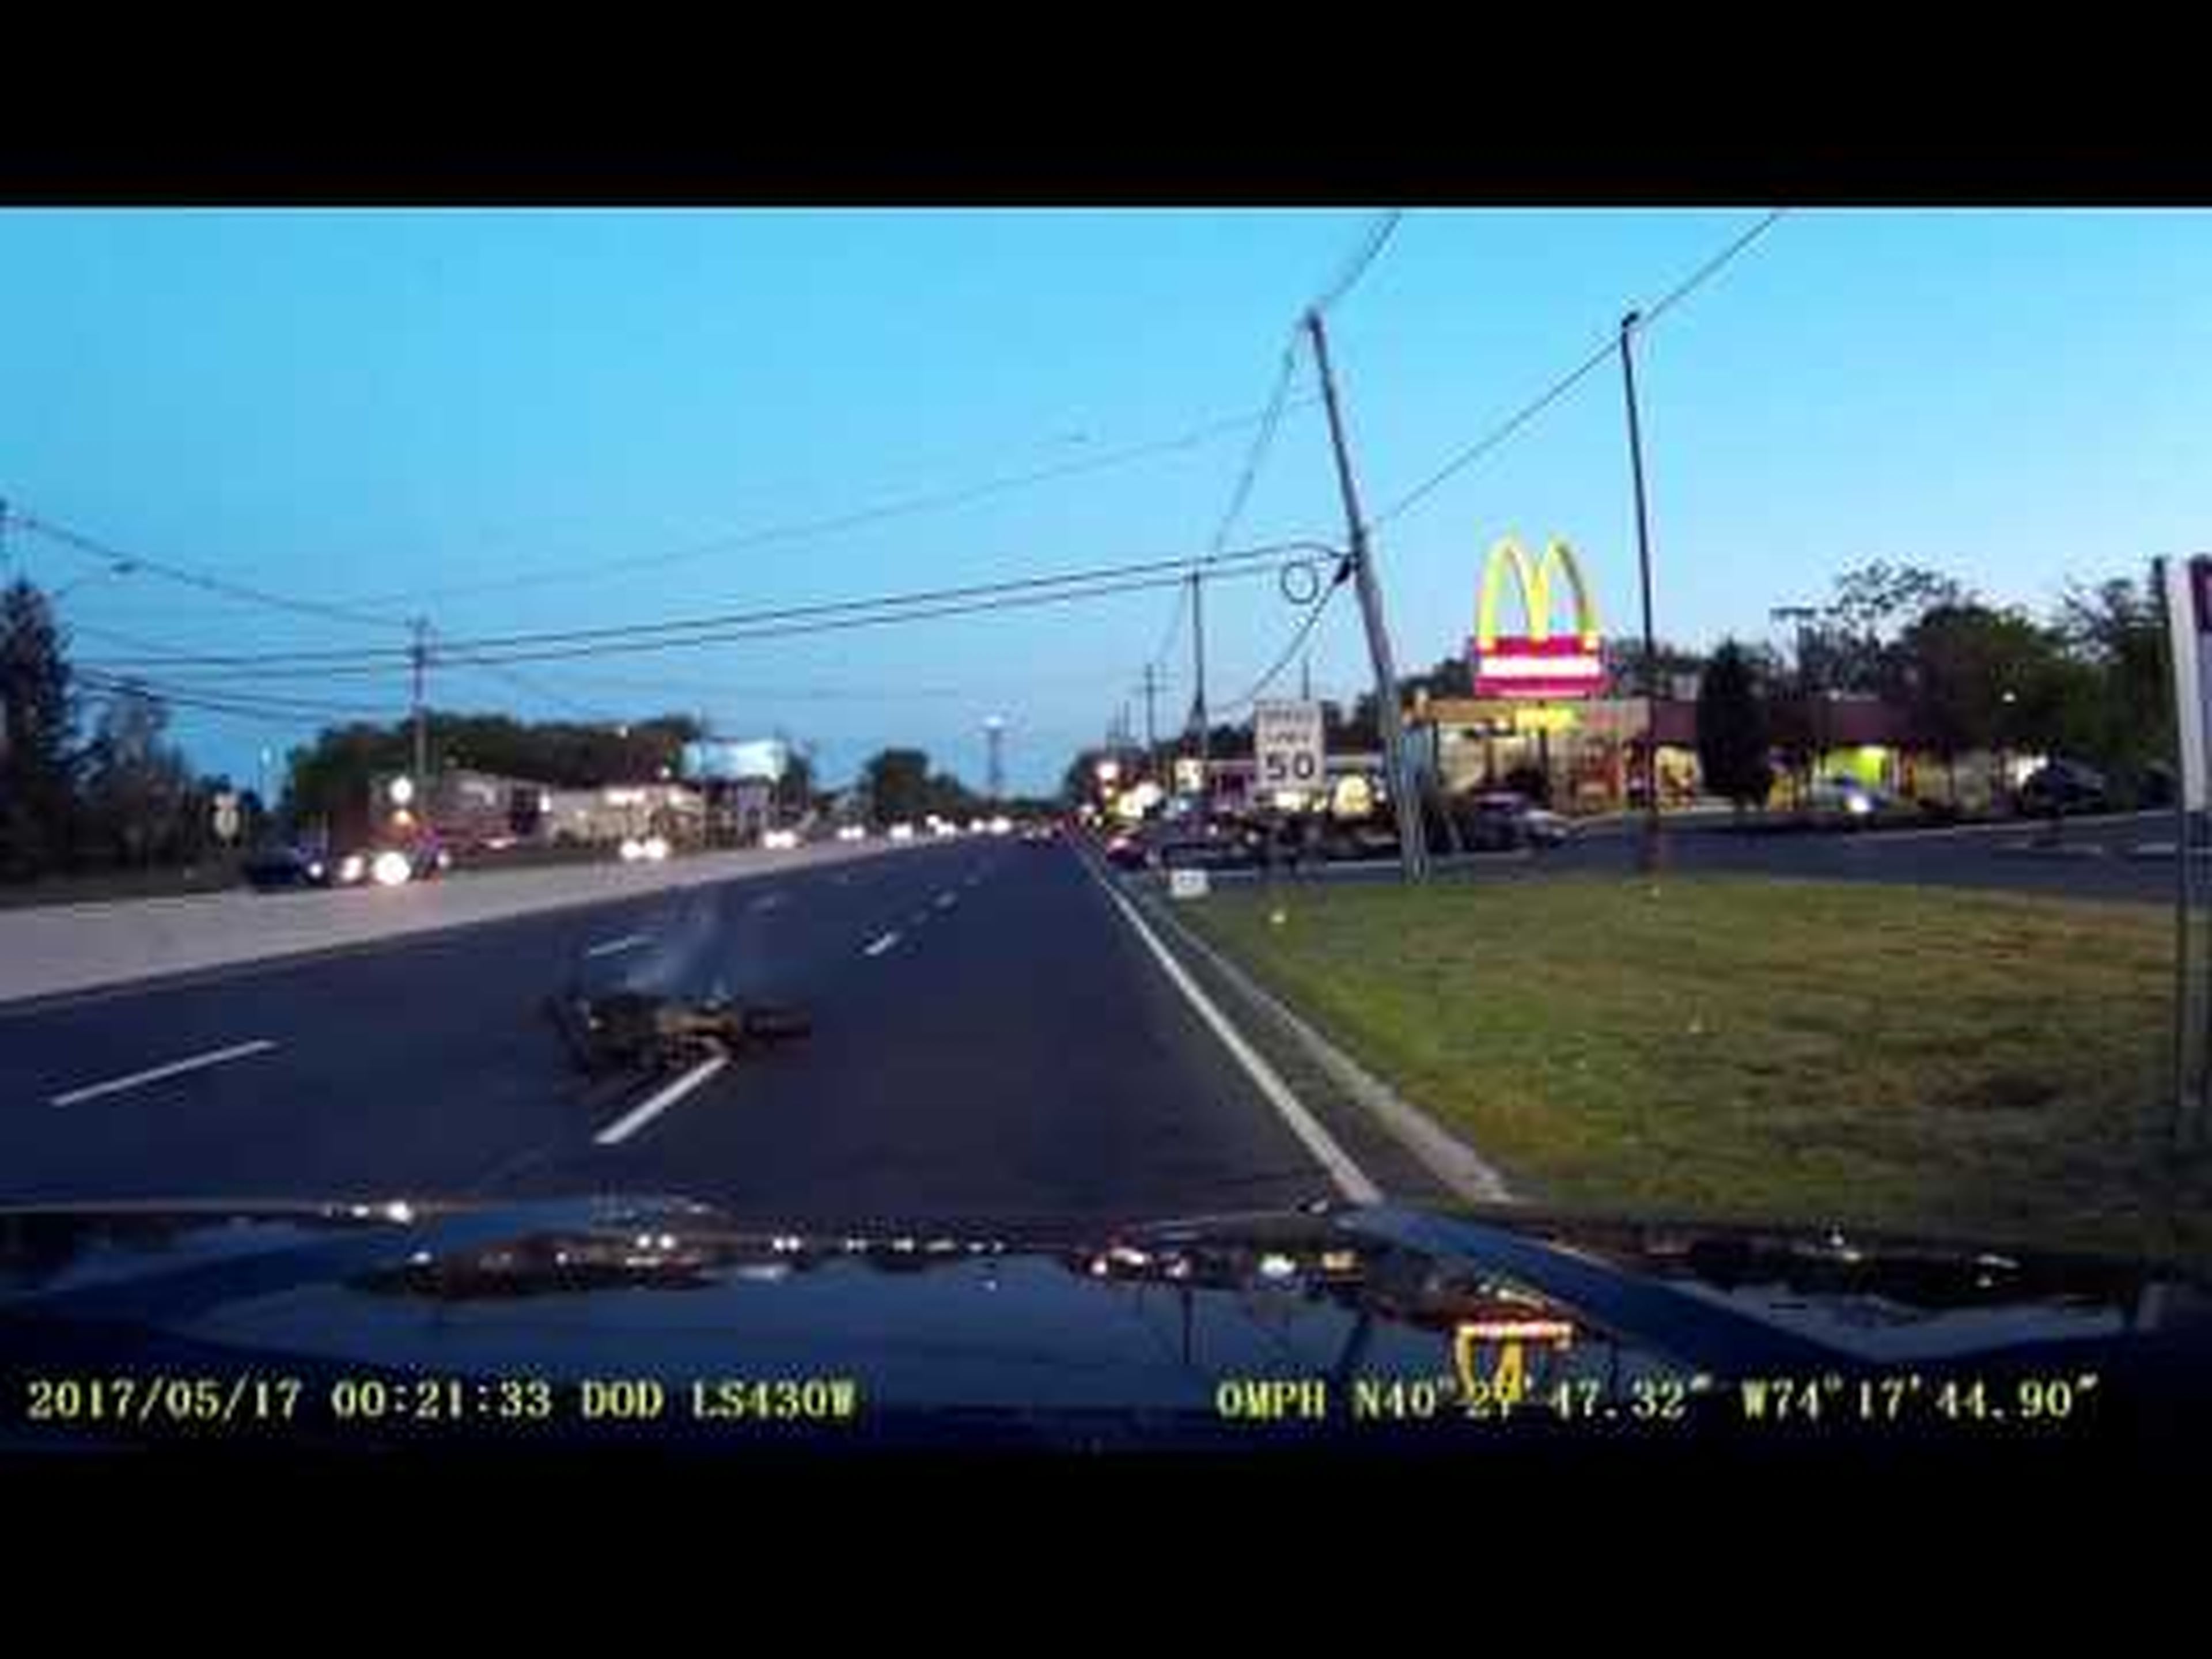 Motorcycle accident